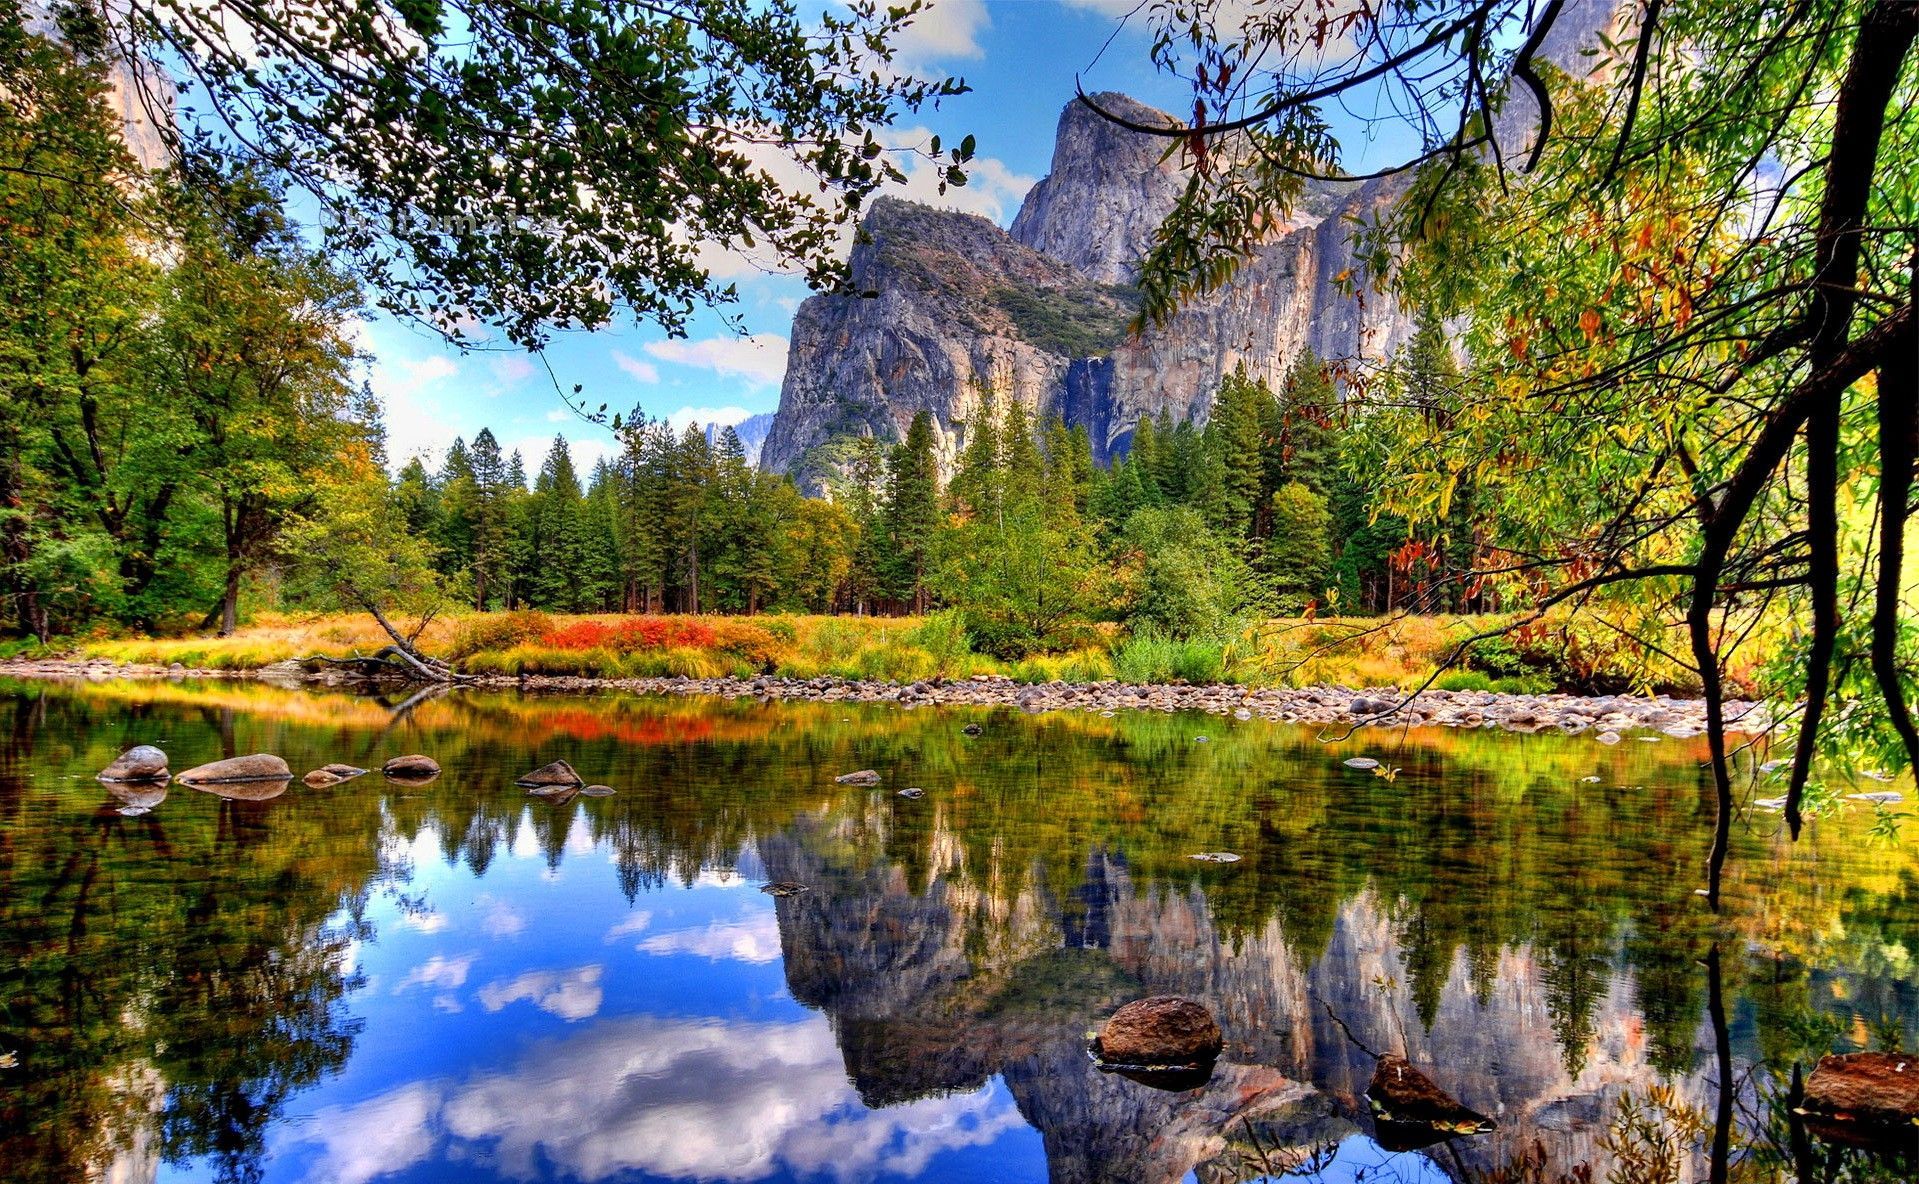 Autumn Tag wallpaper: Autumn Forest Road Nature Trees Splendor Leaves Woods Picture Gallery. Gold Autumn Blu. Mountain lakes, Lake photo, Yosemite national park